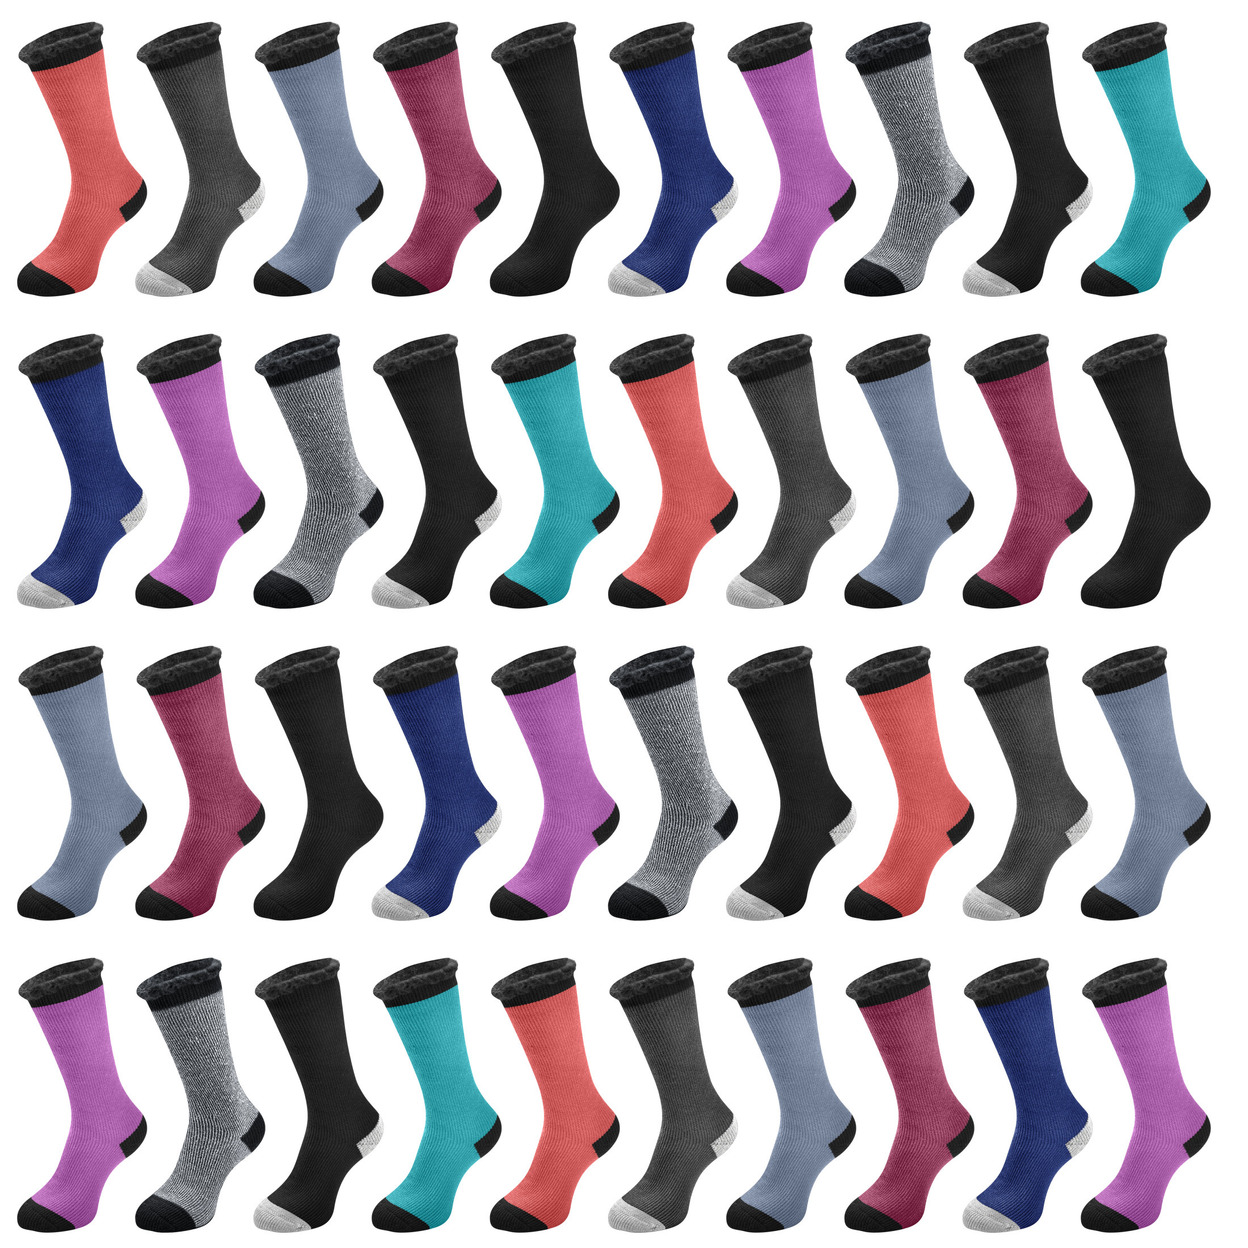 5-Pairs: Men's Thermal-Insulated Brushed Lined Warm Heated Winter Socks For Cold Weather